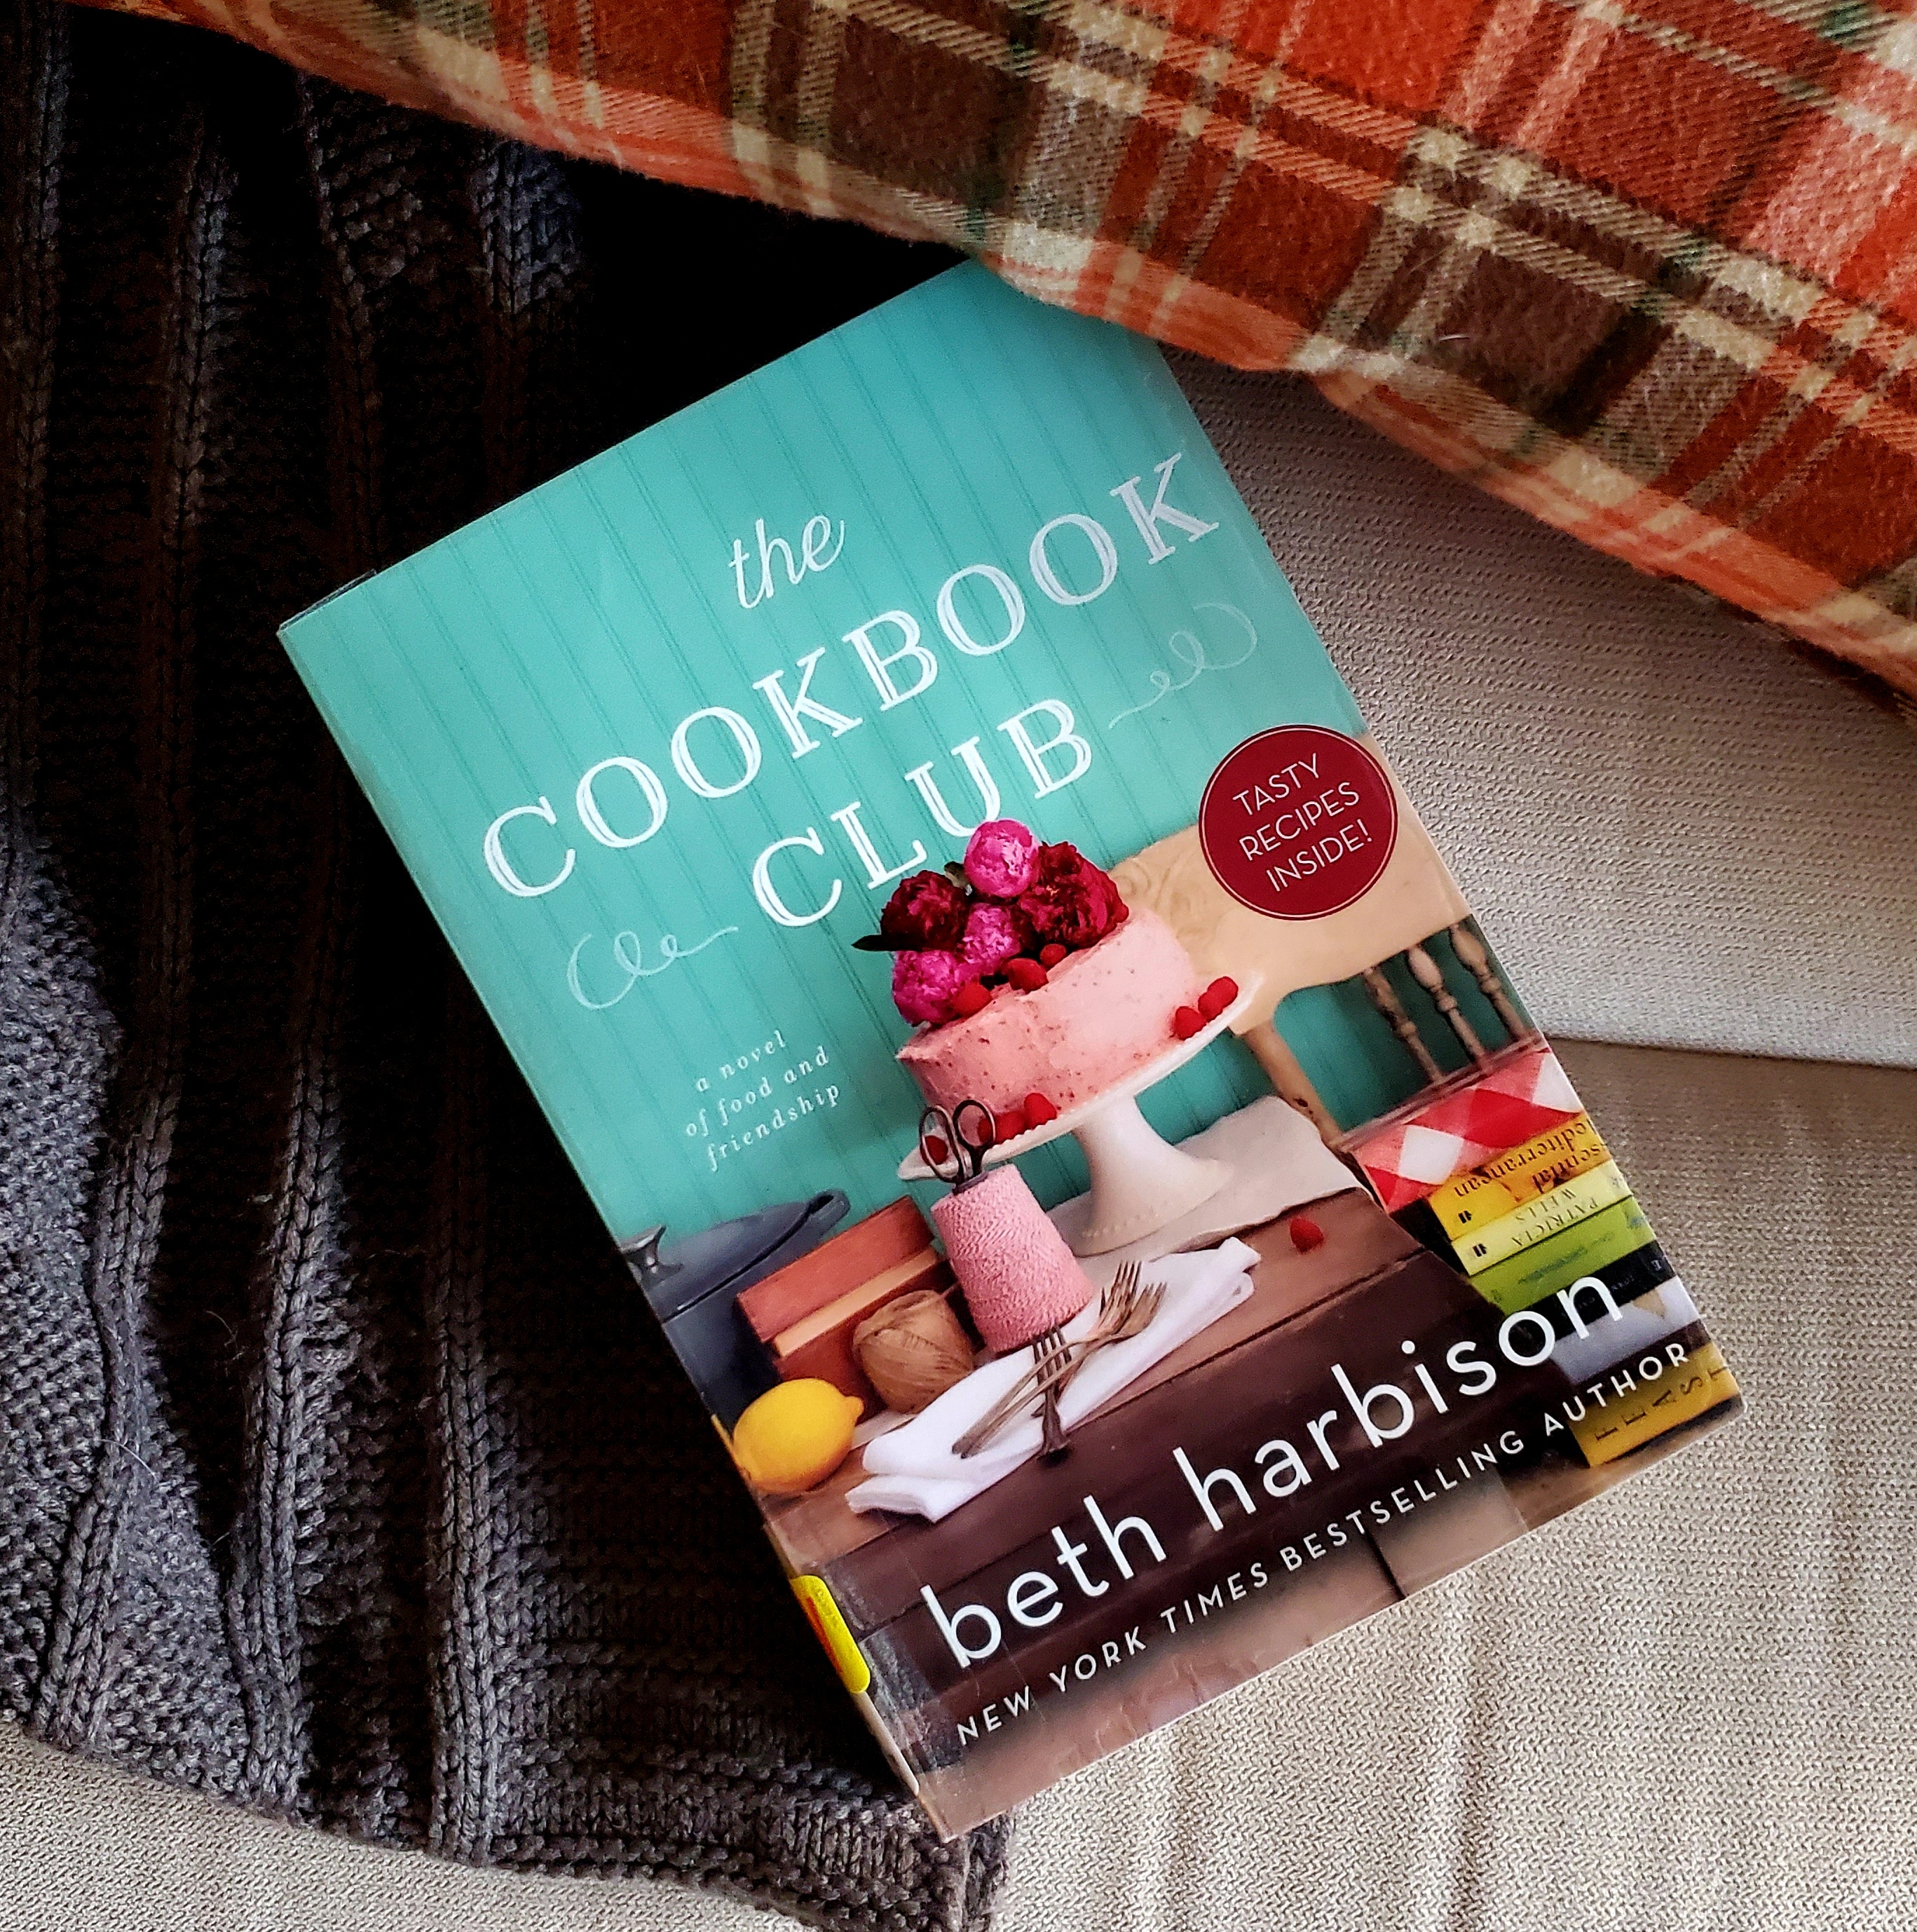 Book Review of THE COOKBOOK CLUB